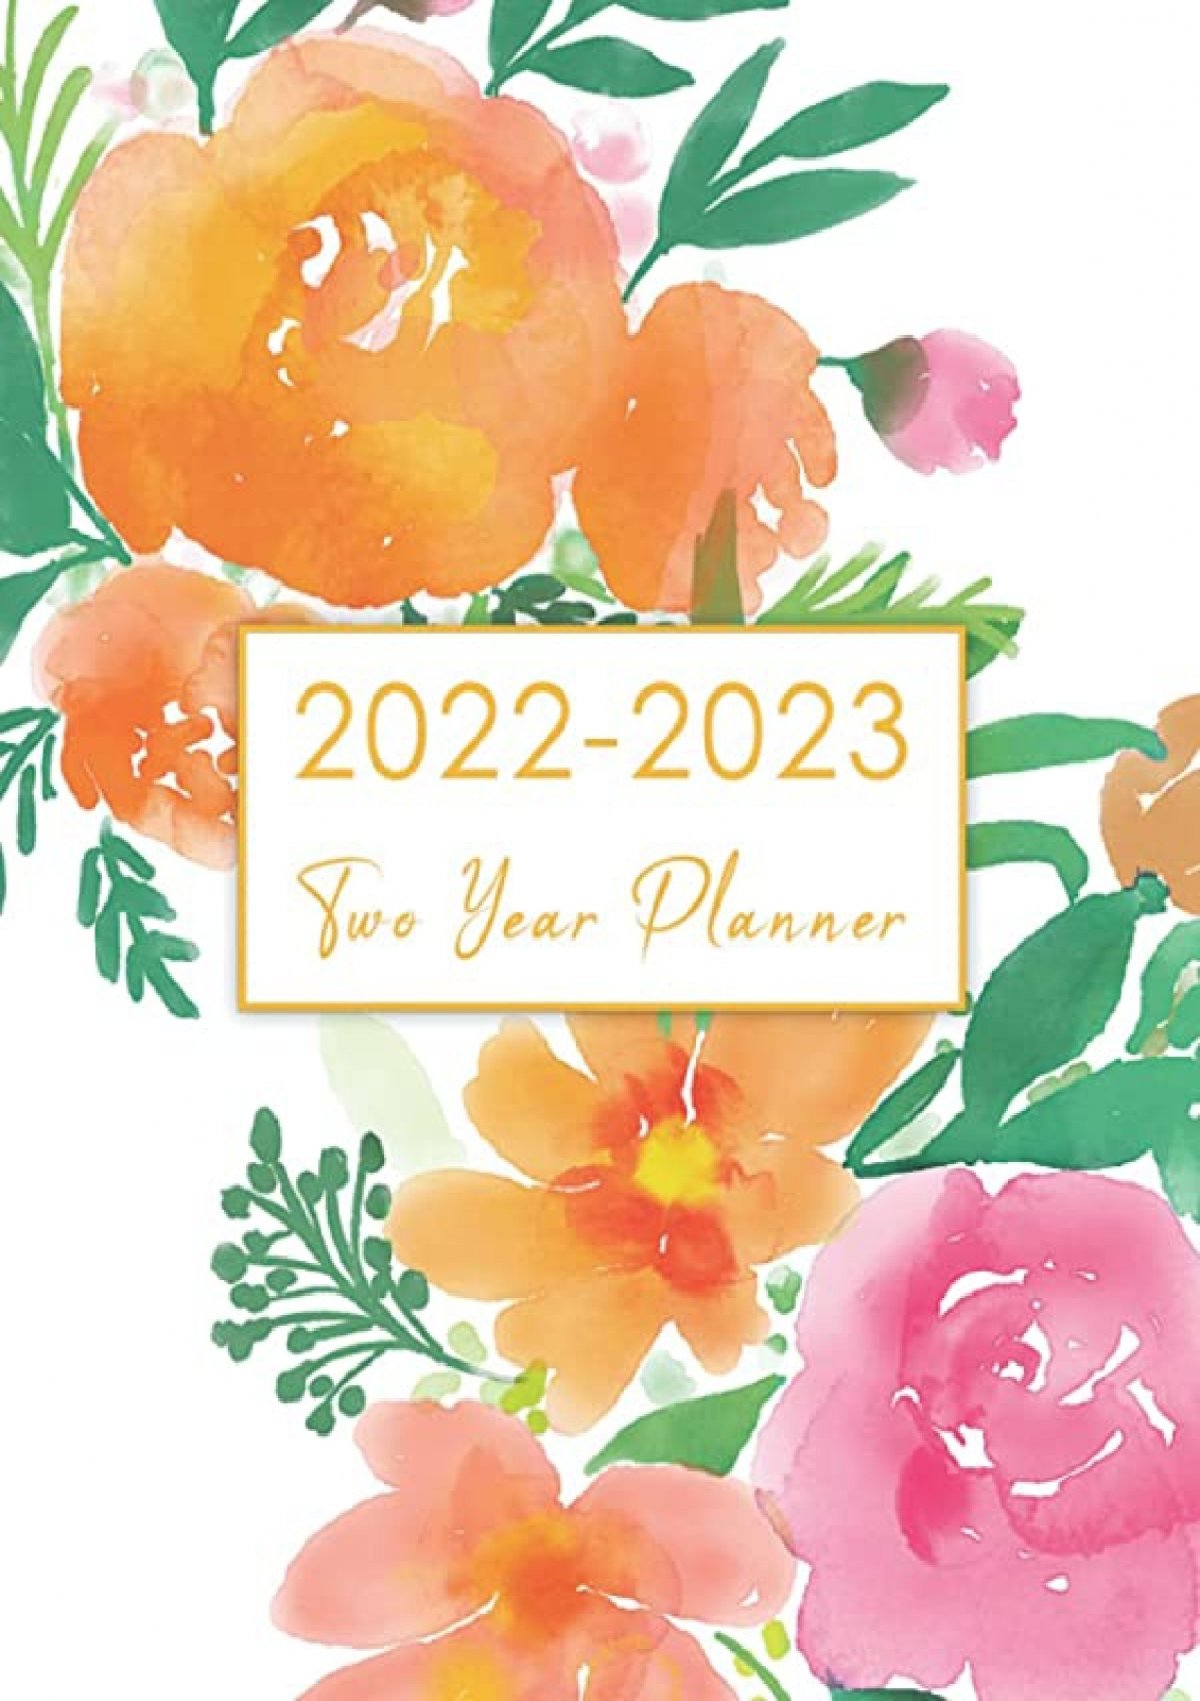 Download Ebook 2022 2023 Two Year Planner Watecolor Flower 2 Year Daily Weekly Monthly 